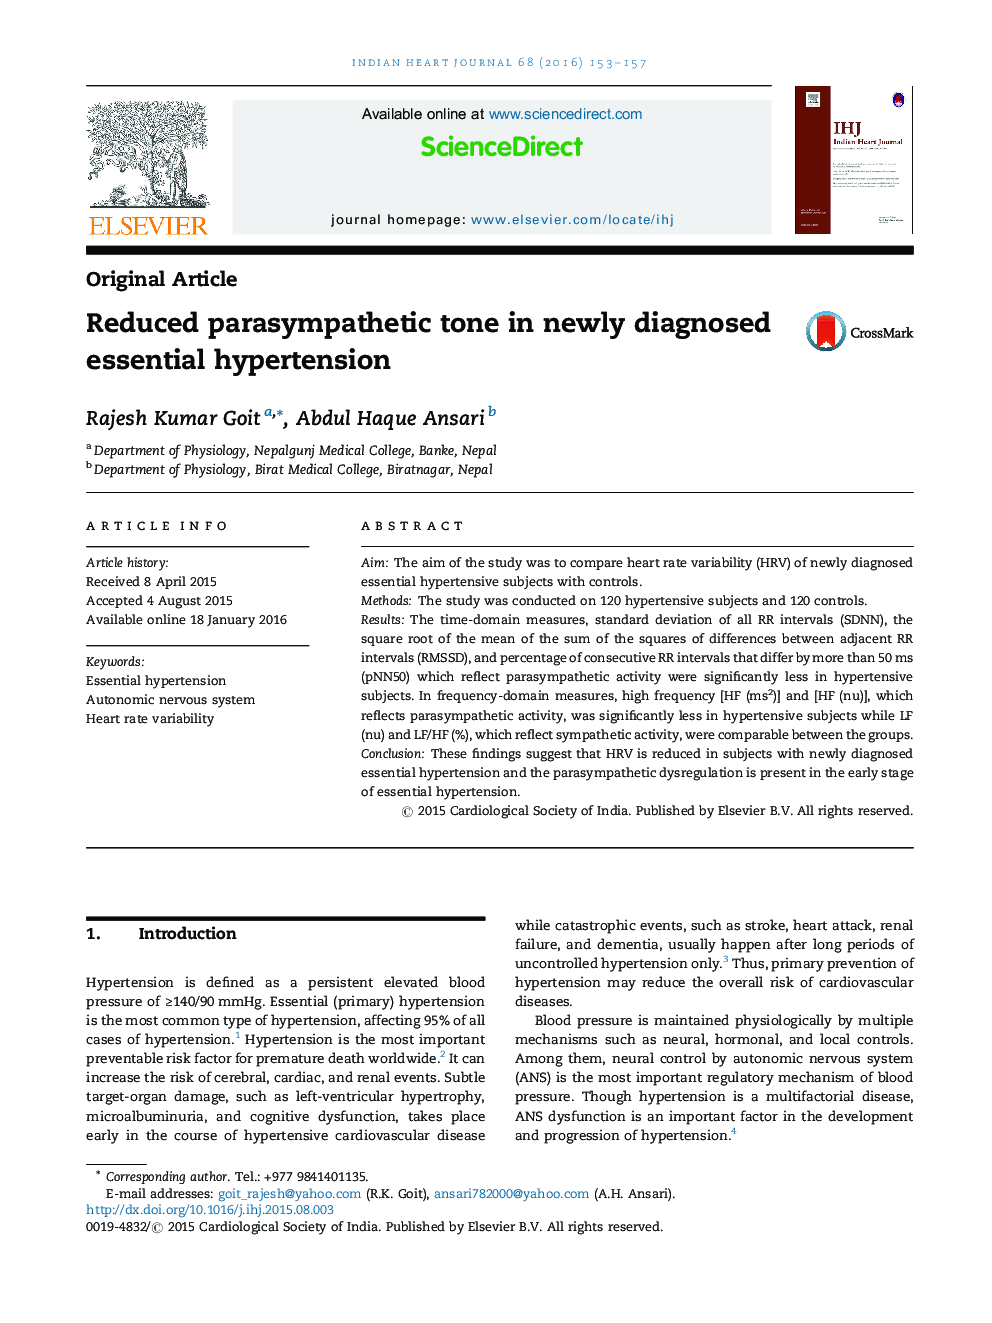 Reduced parasympathetic tone in newly diagnosed essential hypertension